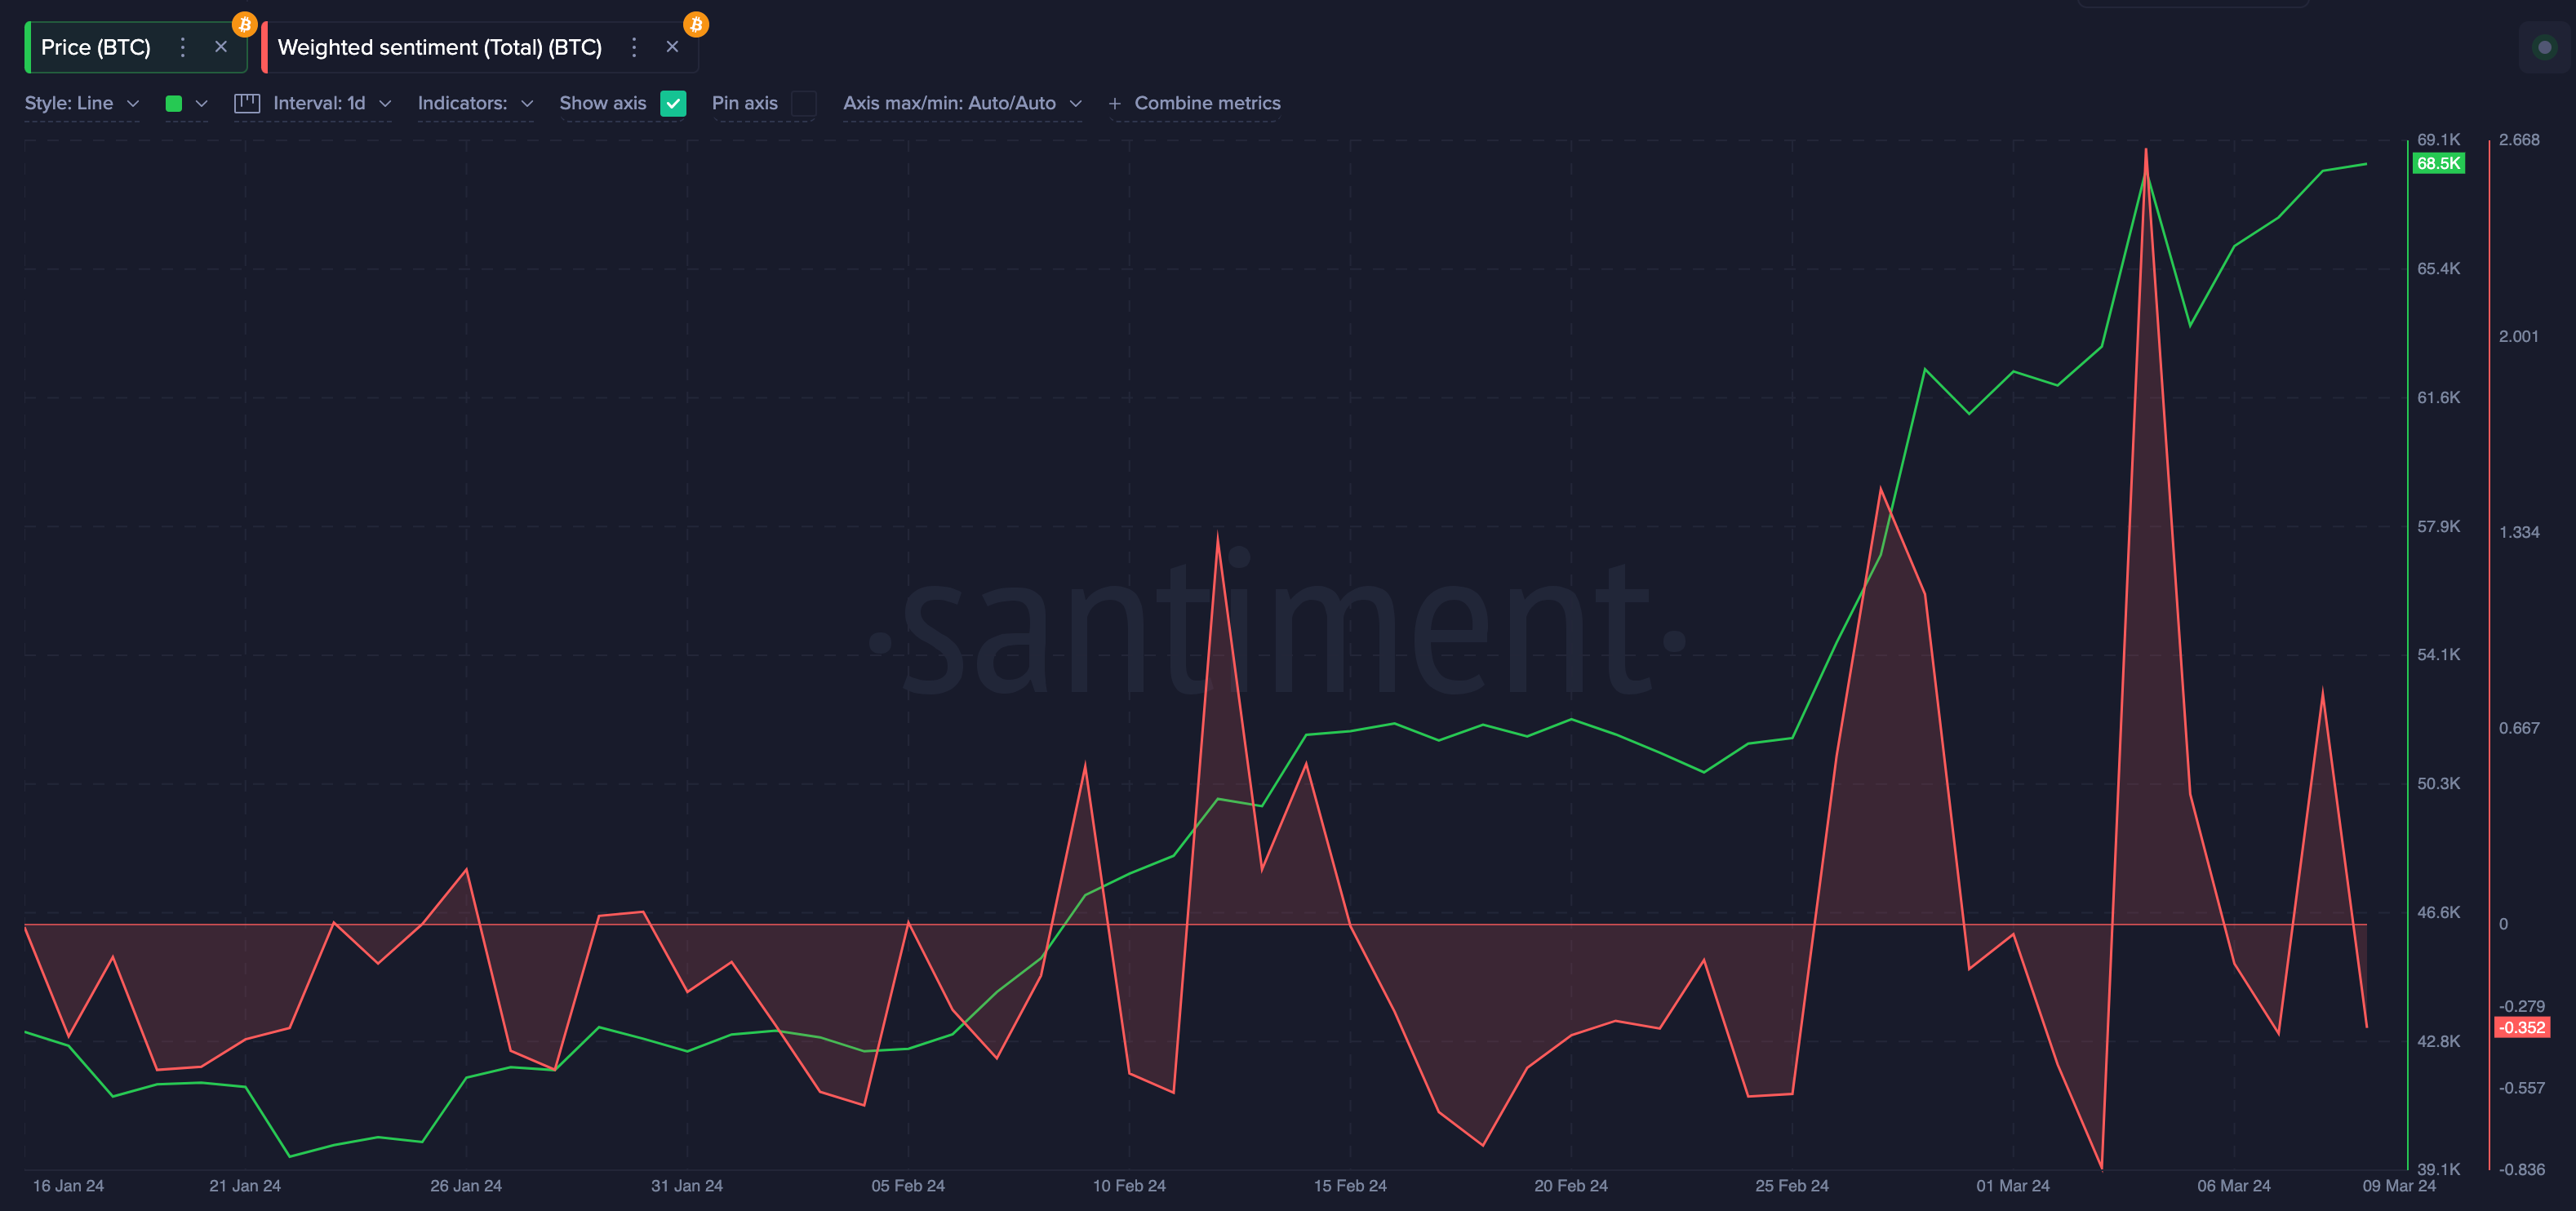 Bitcoin (BTC) Weighted Sentiment vs Price | Source: Santiment